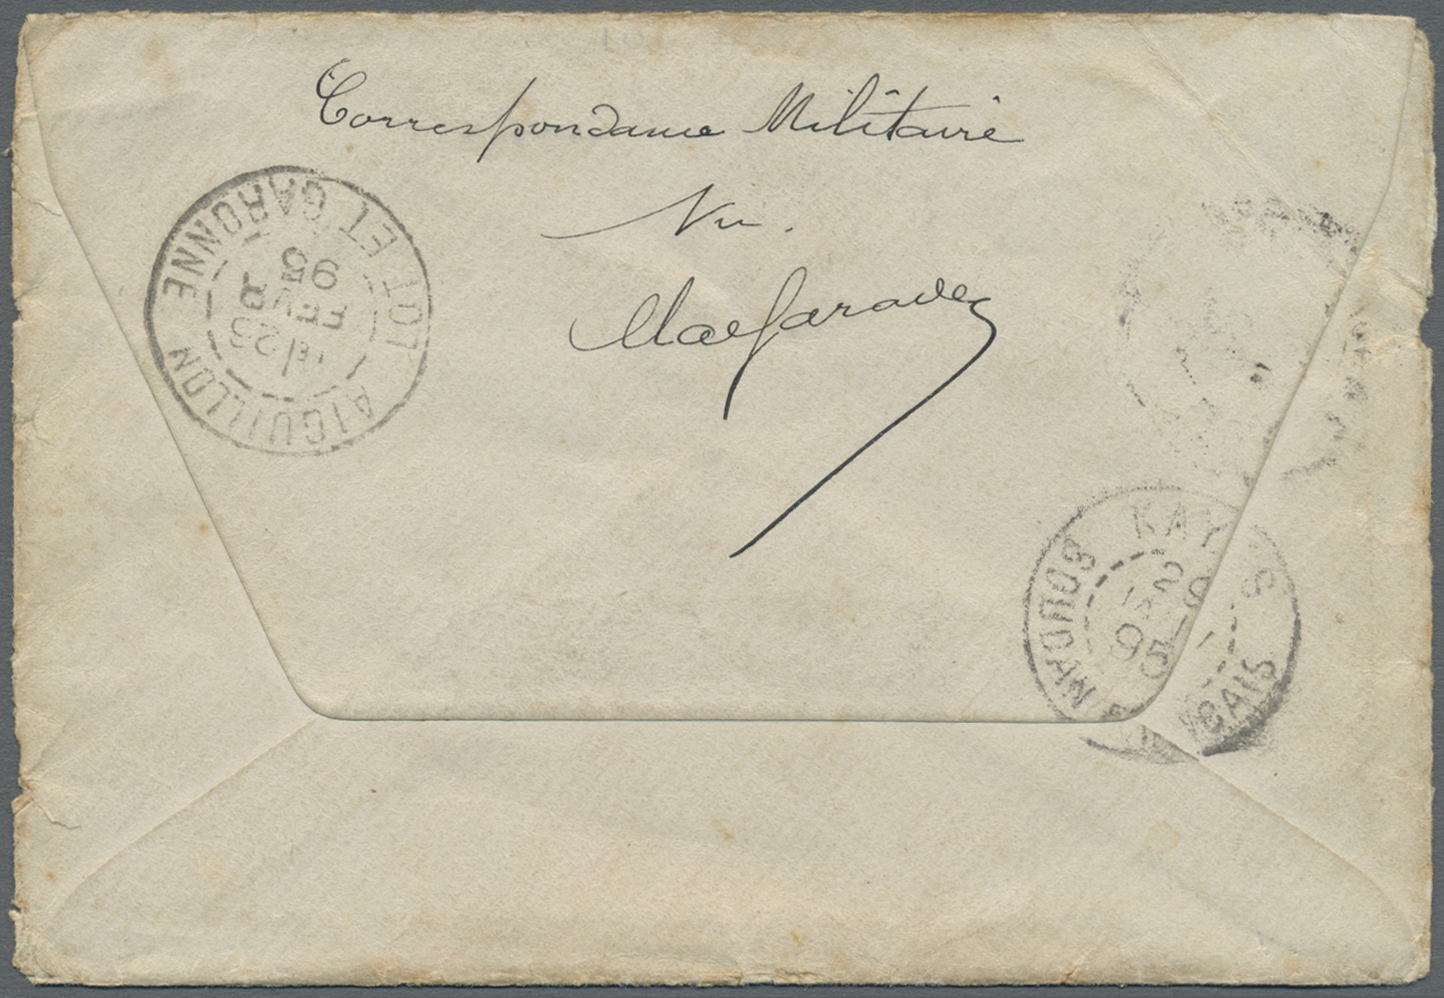 Br Französisch-Sudan: 1895. Soiled Stampless Envelope Endorsed 'Corps D 'Occupation Du Soudan' Addressed To France Cance - Covers & Documents